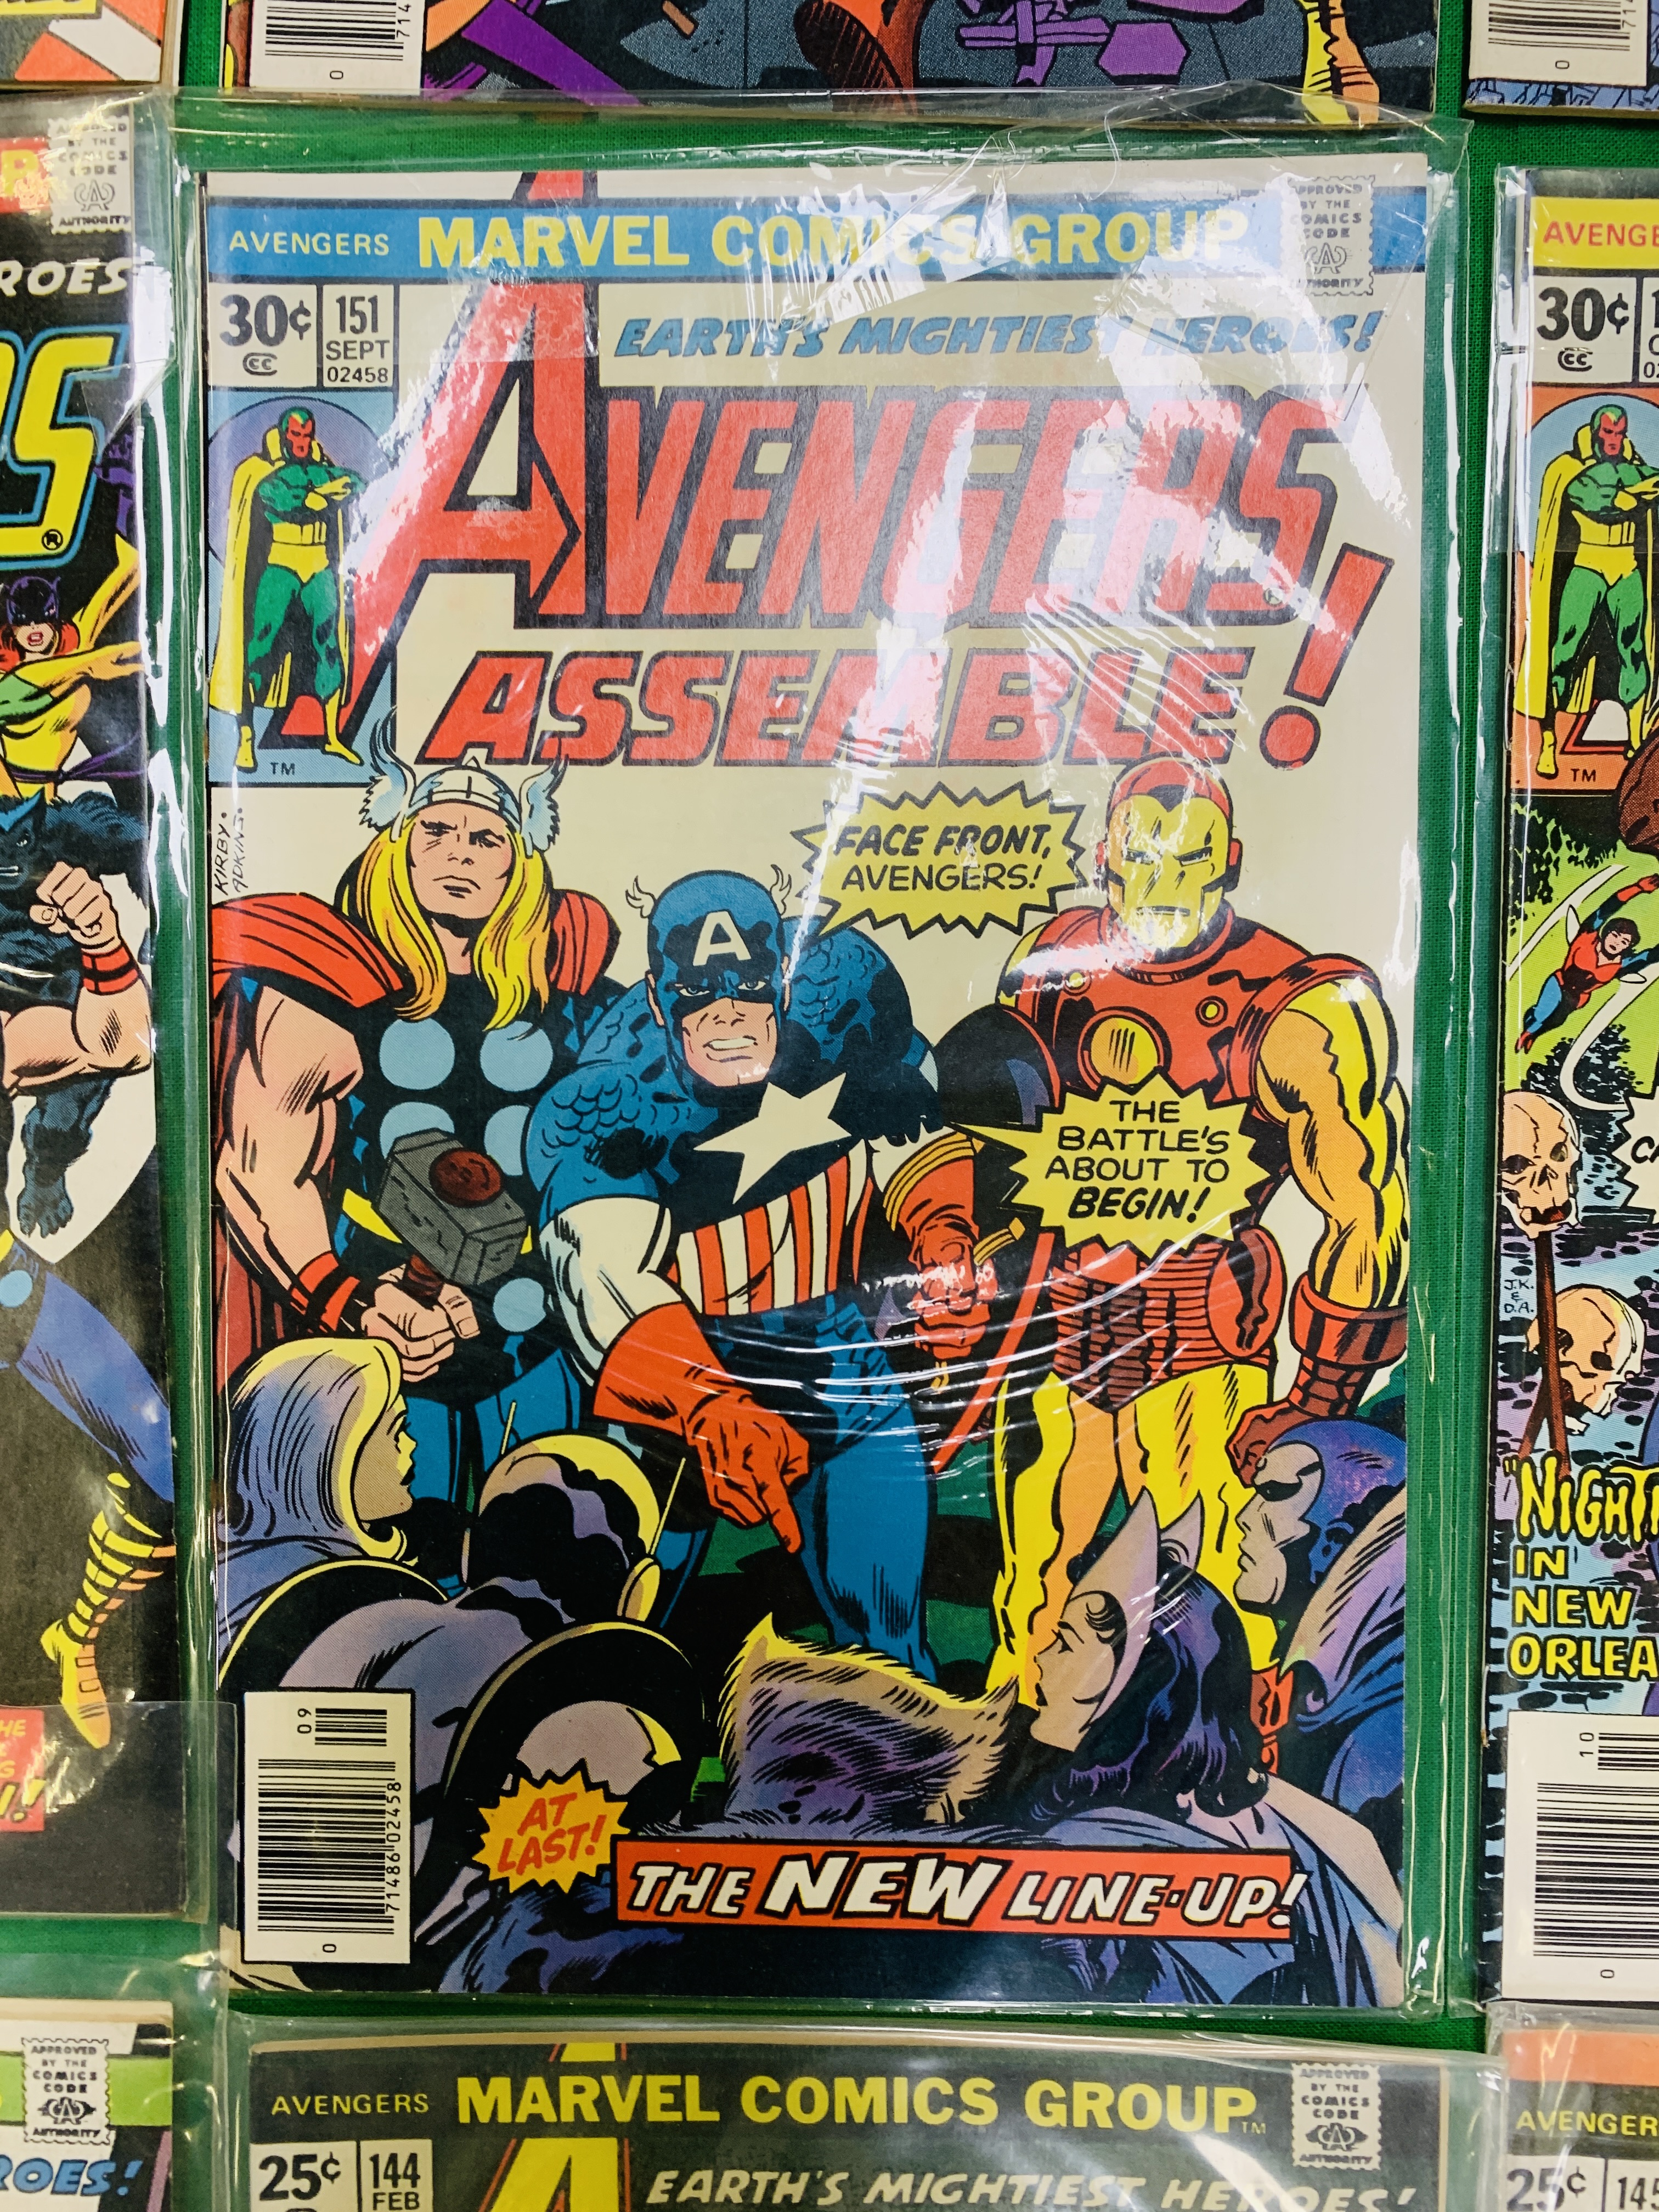 MARVEL COMICS THE AVENGERS NO. 101 - 299, MISSING ISSUES 103 AND 110. - Image 37 of 130